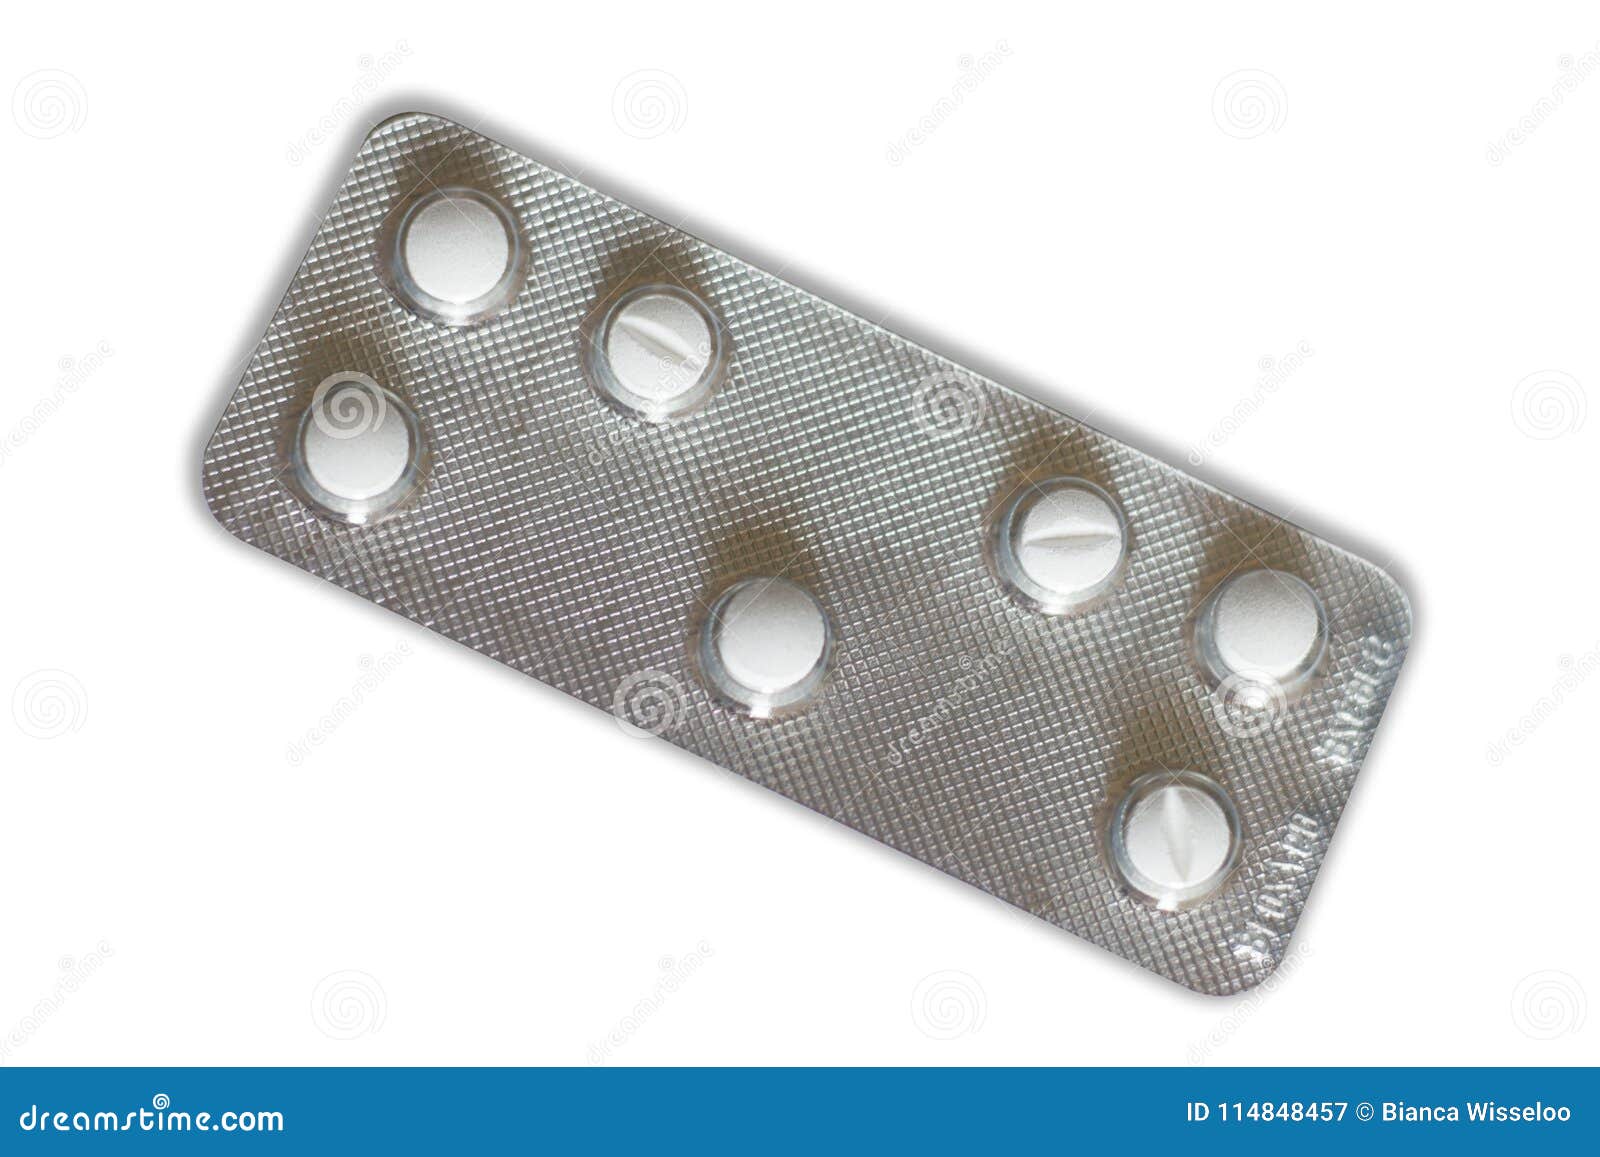 Pills in a Blister Packaging Stock Image - Image science, medical: 114848457